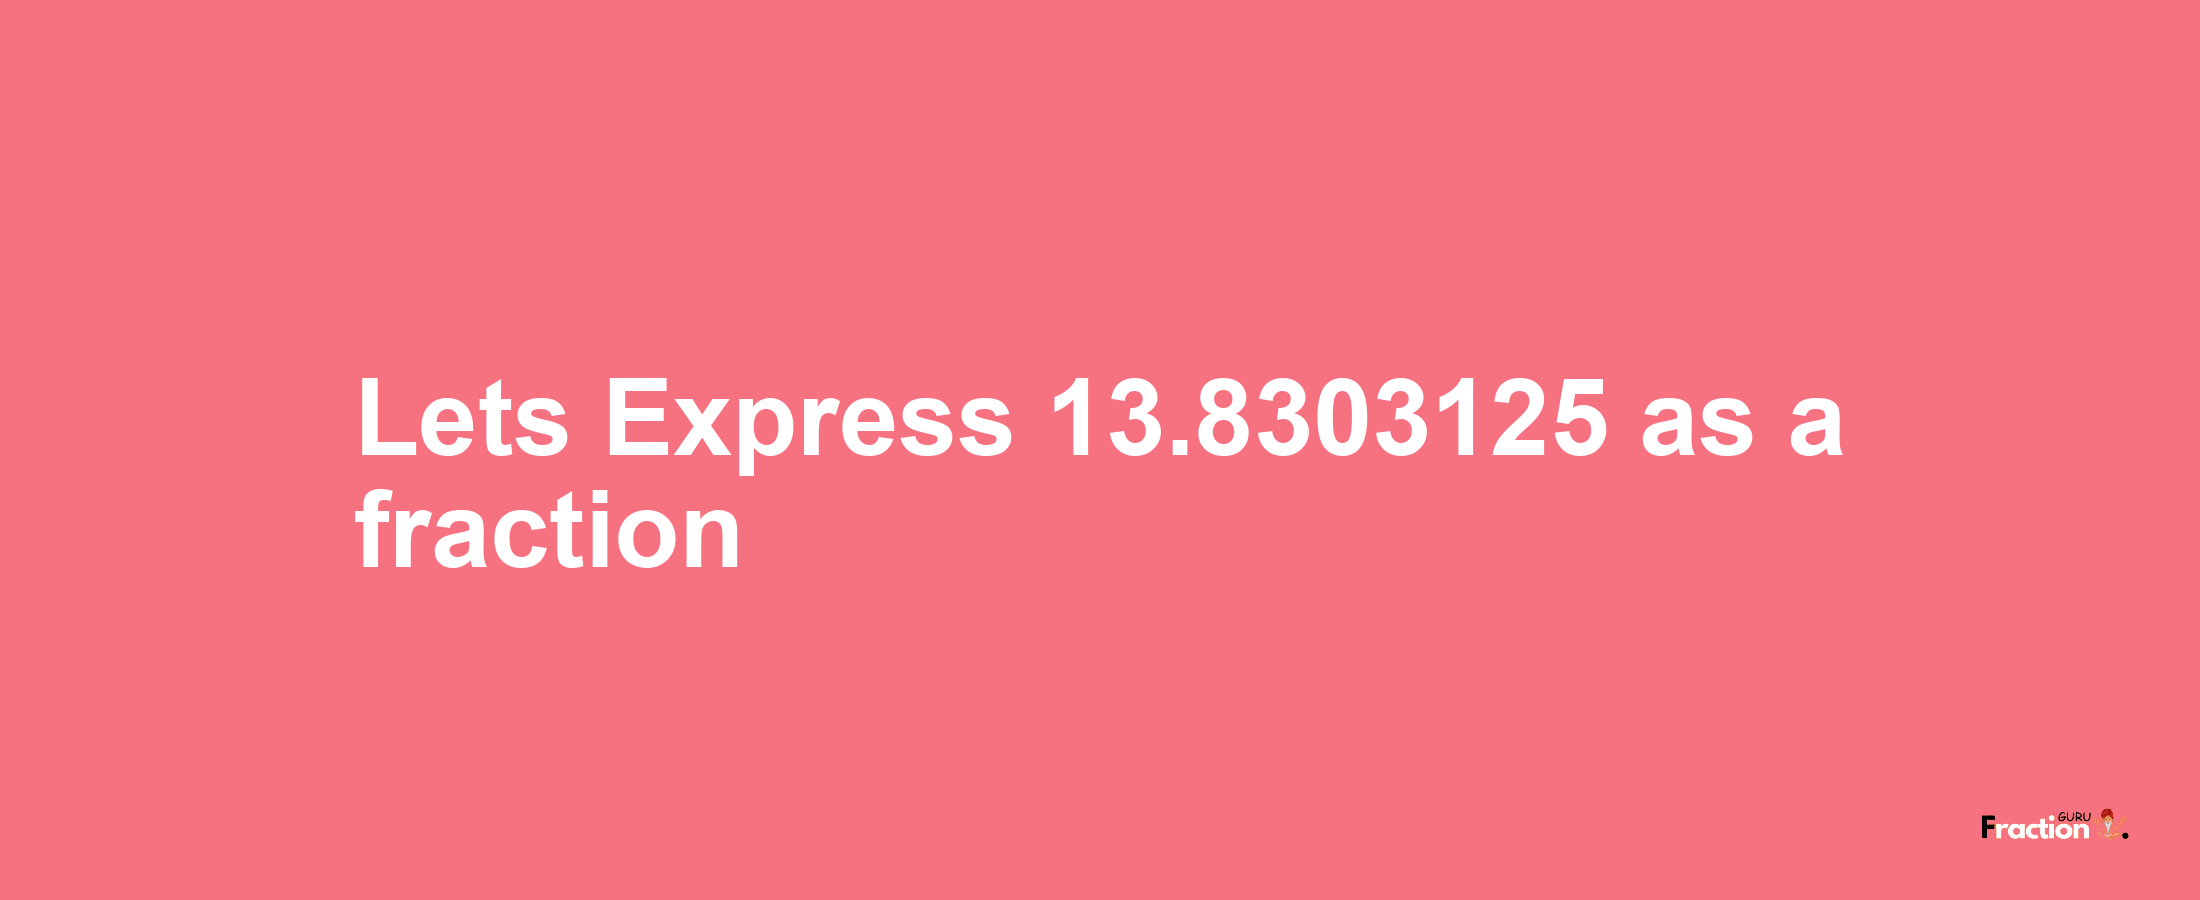 Lets Express 13.8303125 as afraction